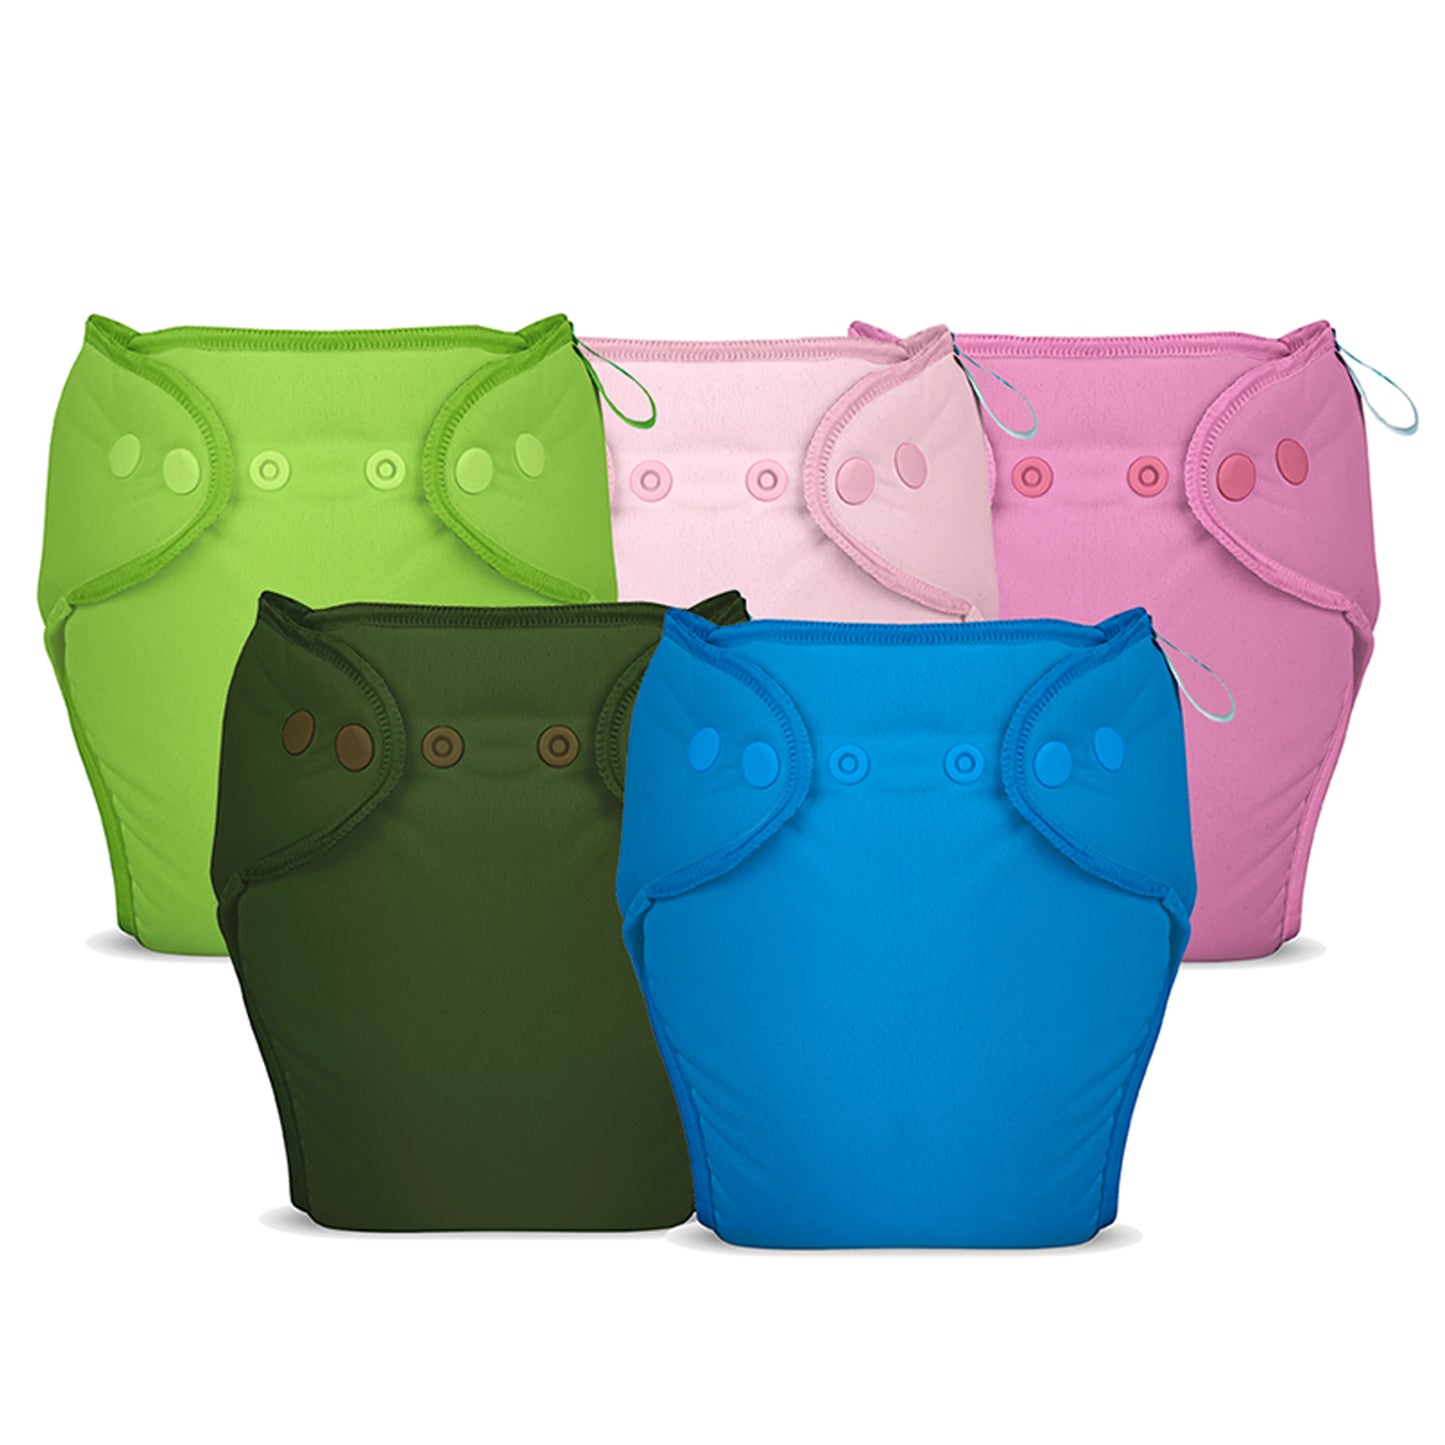 5 Piece Pack of New & Improved Smart Nappy for 10-18 months old (Size LXL)